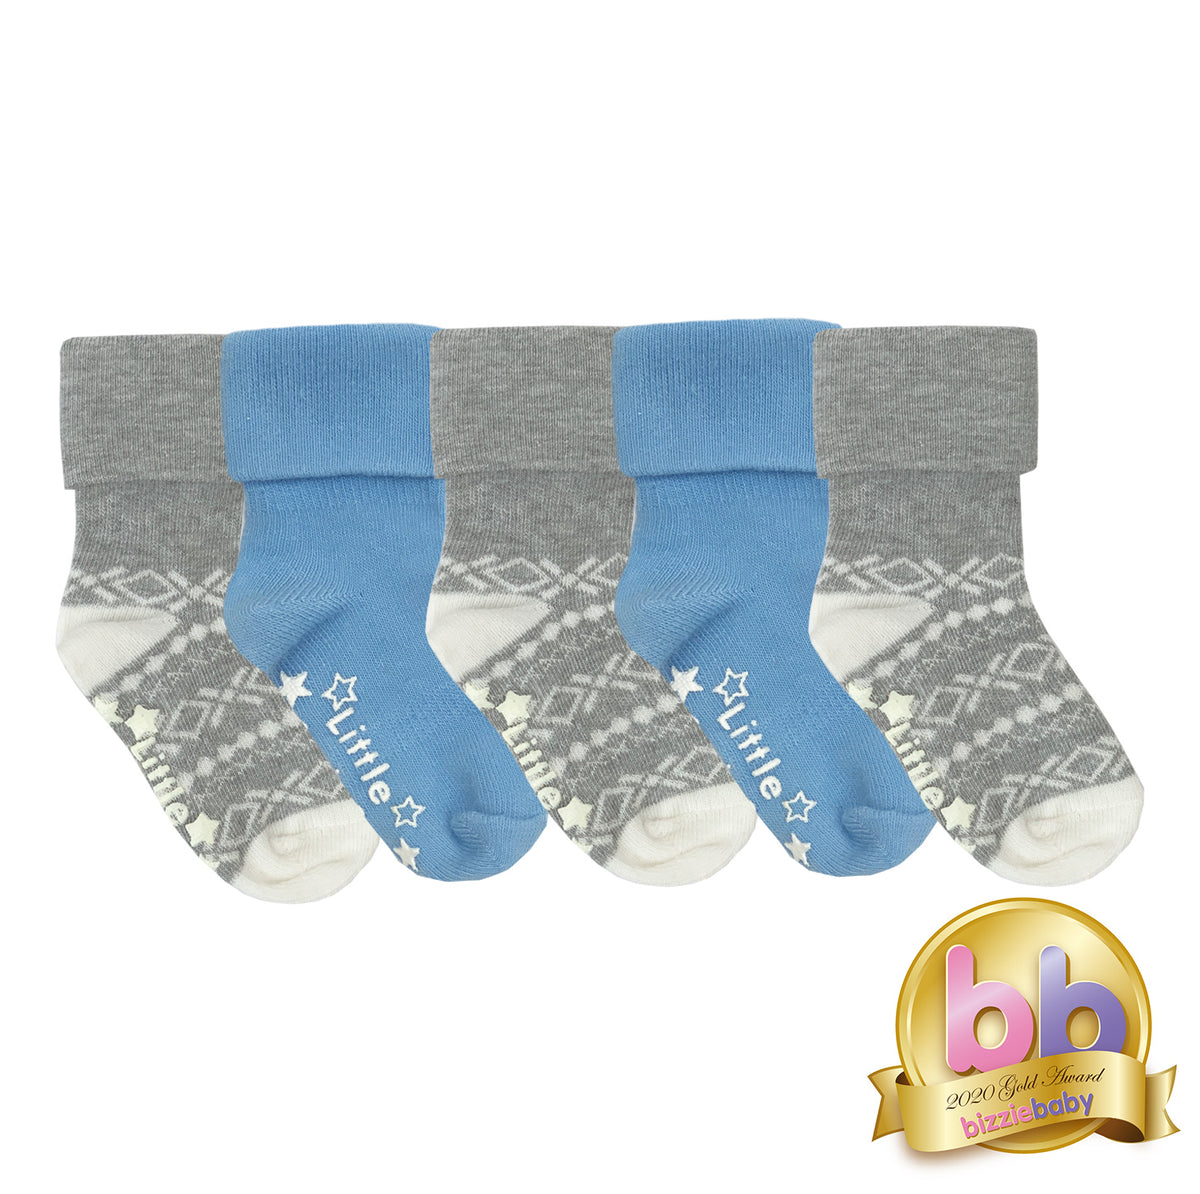 Non-Slip Stay on Baby and Toddler Socks - 5 Pack in Ocean Blue, Grey and Nordic